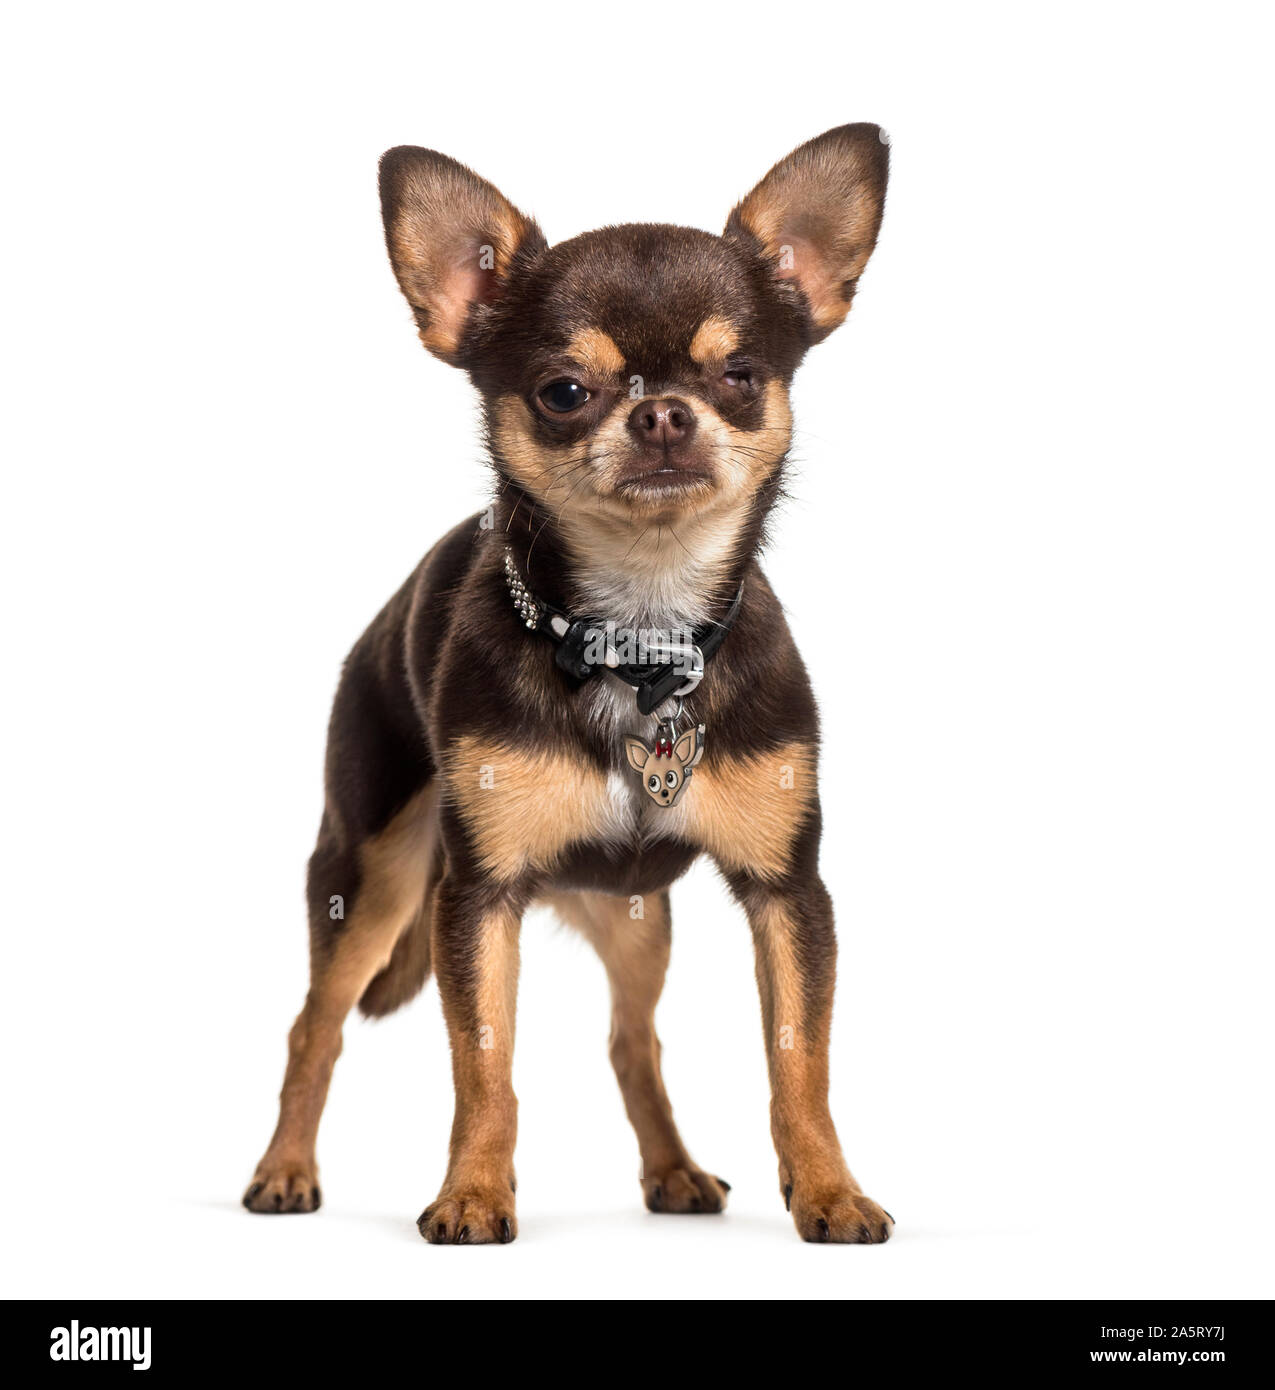 Illness Chihuahua with one eye less standing against white background Stock Photo